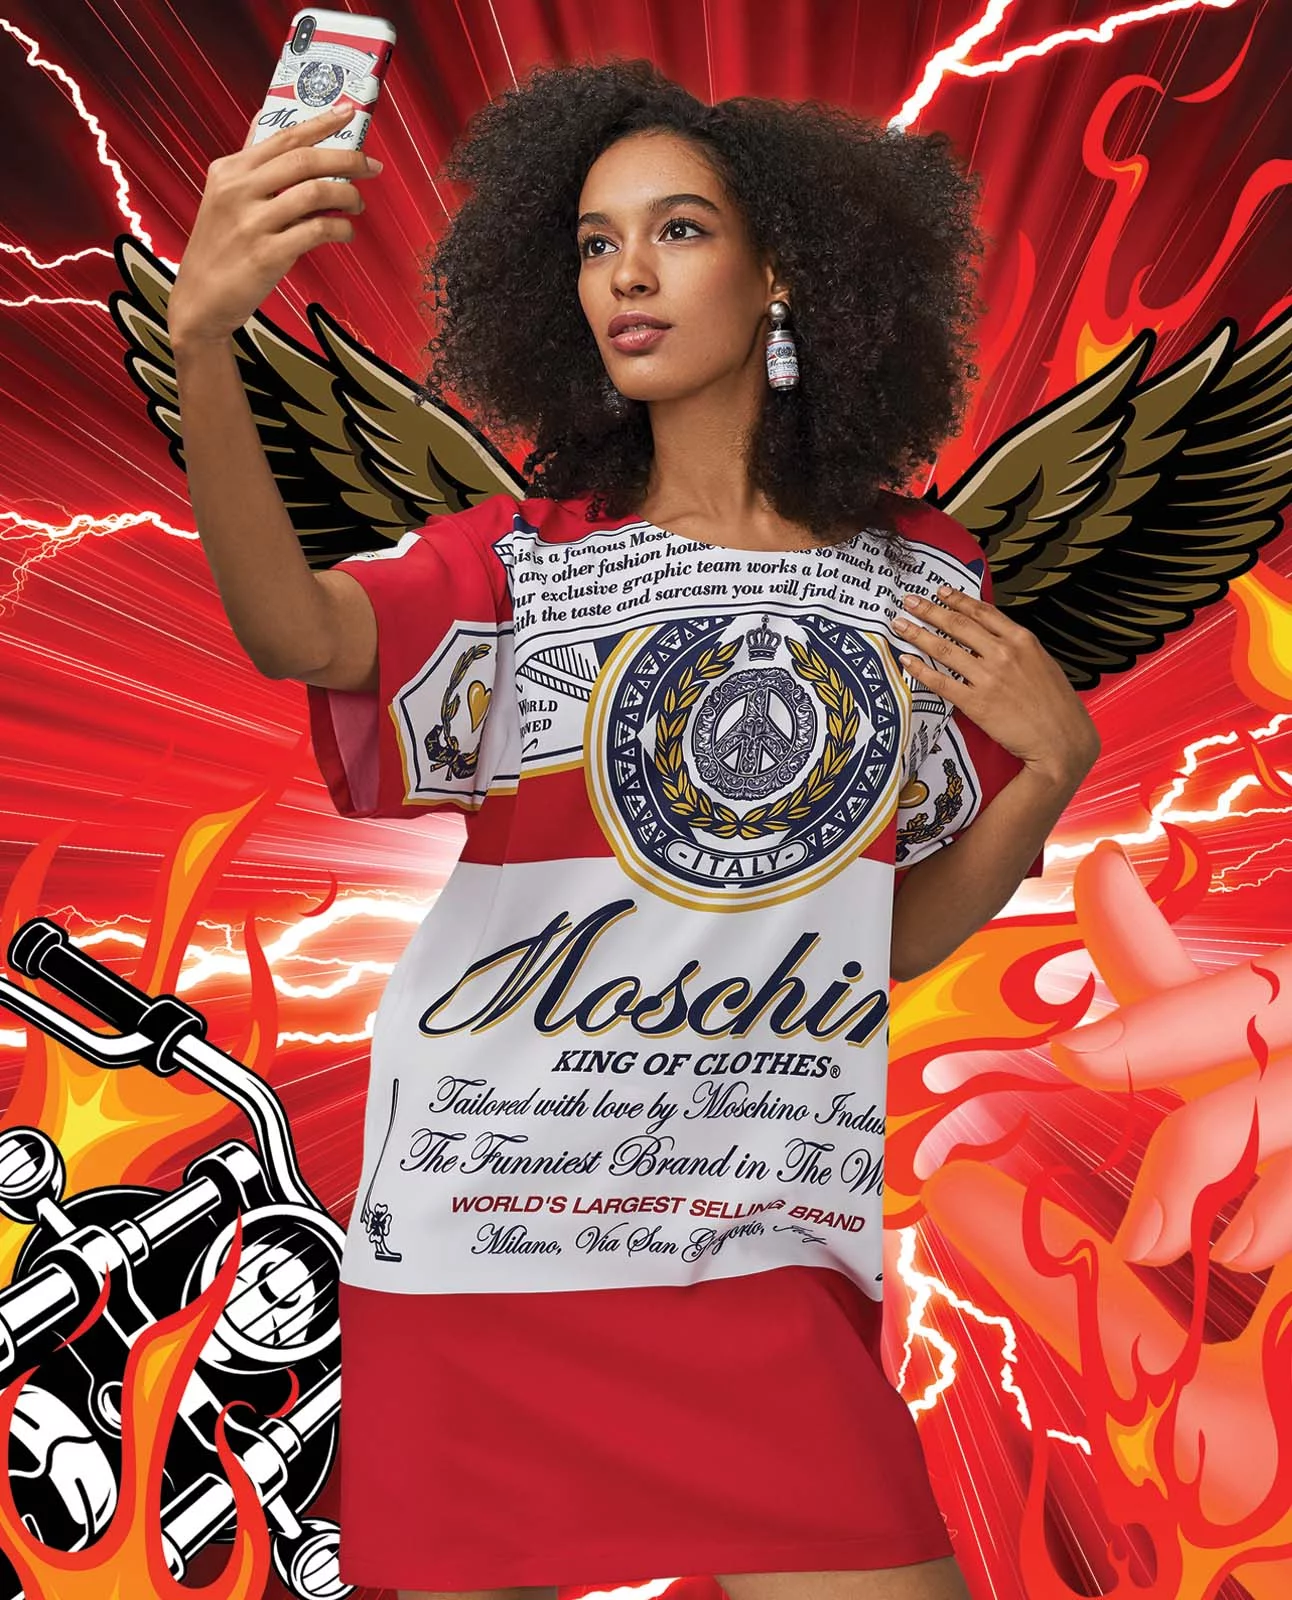 Moschino x Budweiser 2 by Portis WASP